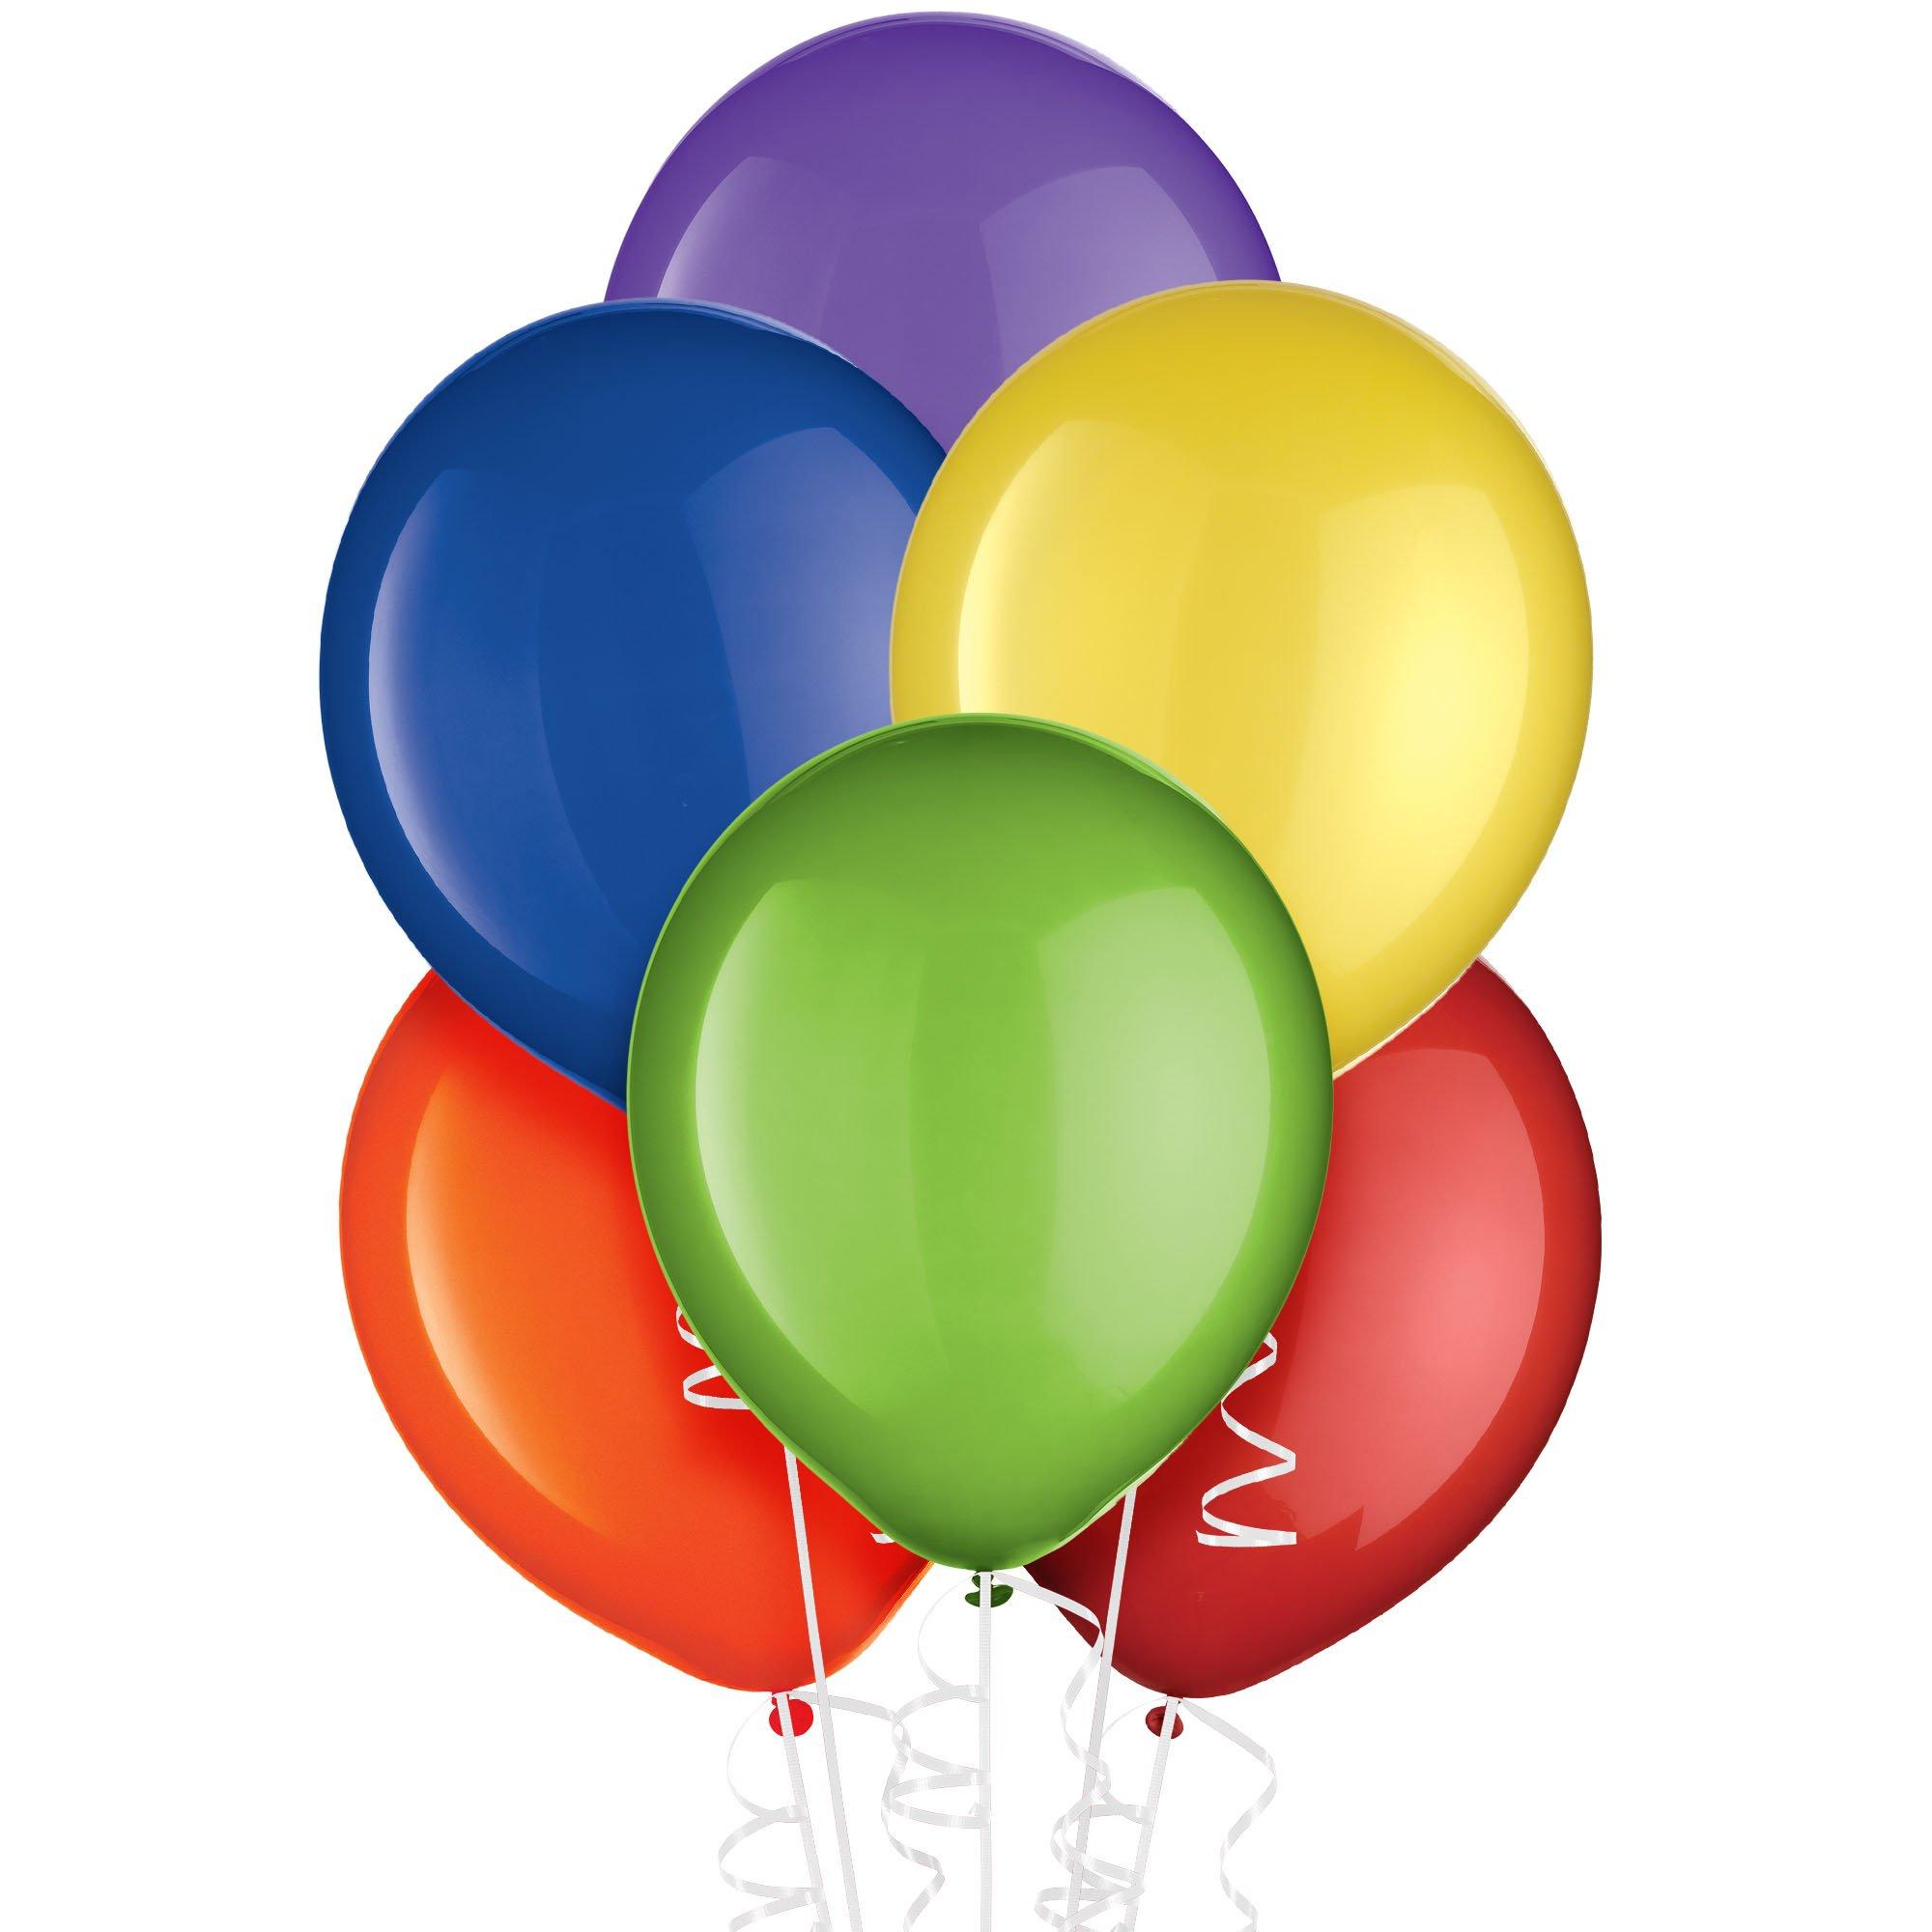 Overjas Rang Drama 15ct, 12in, Assorted Color Balloons | Party City